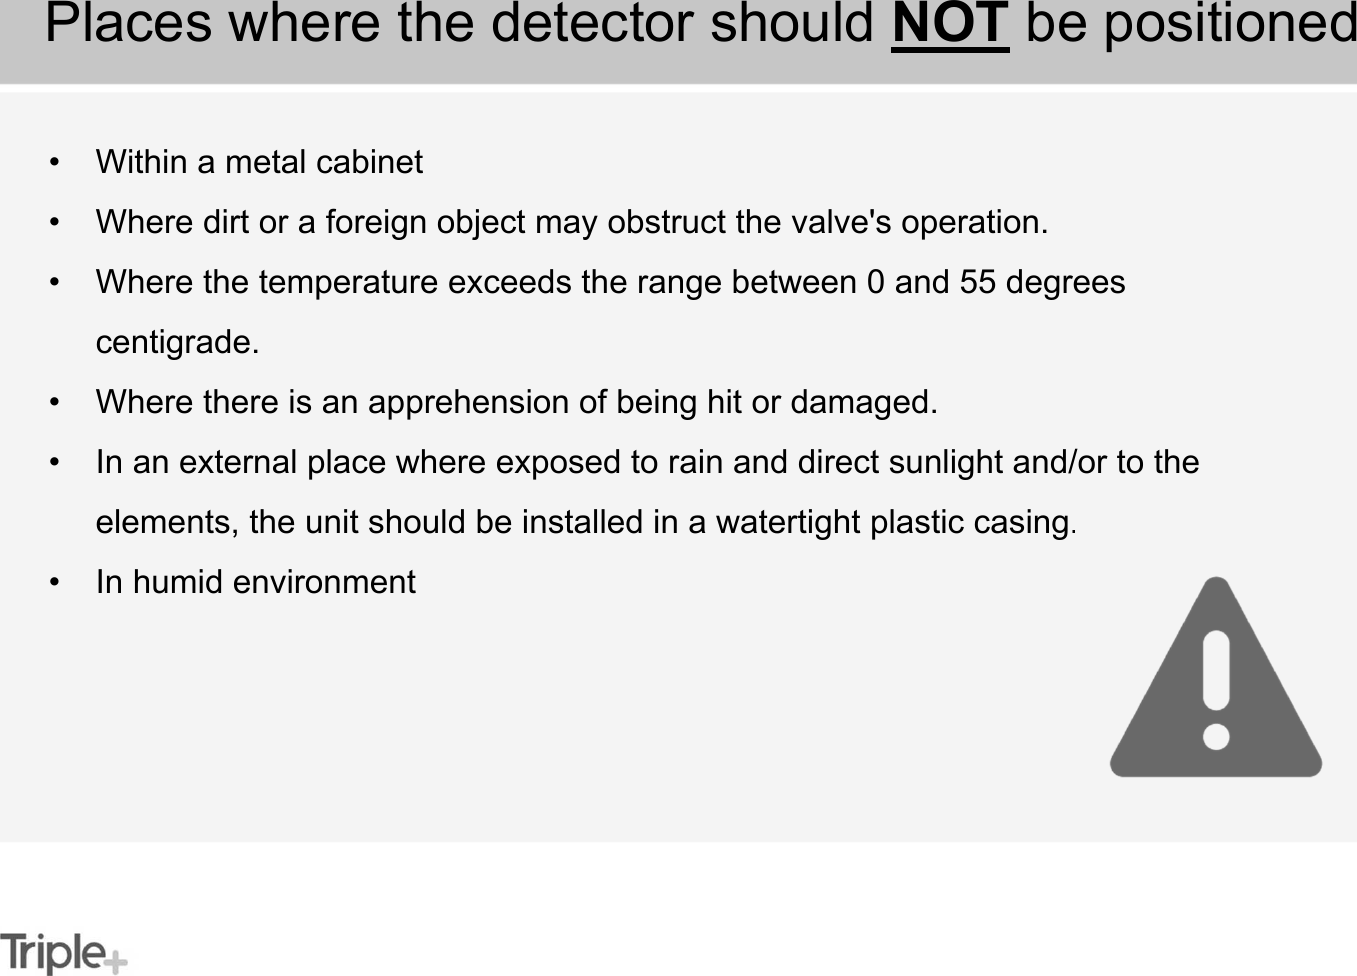 • Within a metal cabinet• Where dirt or a foreign object may obstruct the valve&apos;s operation.• Where the temperature exceeds the range between 0 and 55 degrees centigrade.• Where there is an apprehension of being hit or damaged.• In an external place where exposed to rain and direct sunlight and/or to the elements, the unit should be installed in a watertight plastic casing.• In humid environmentPlaces where the detector should NOT be positioned